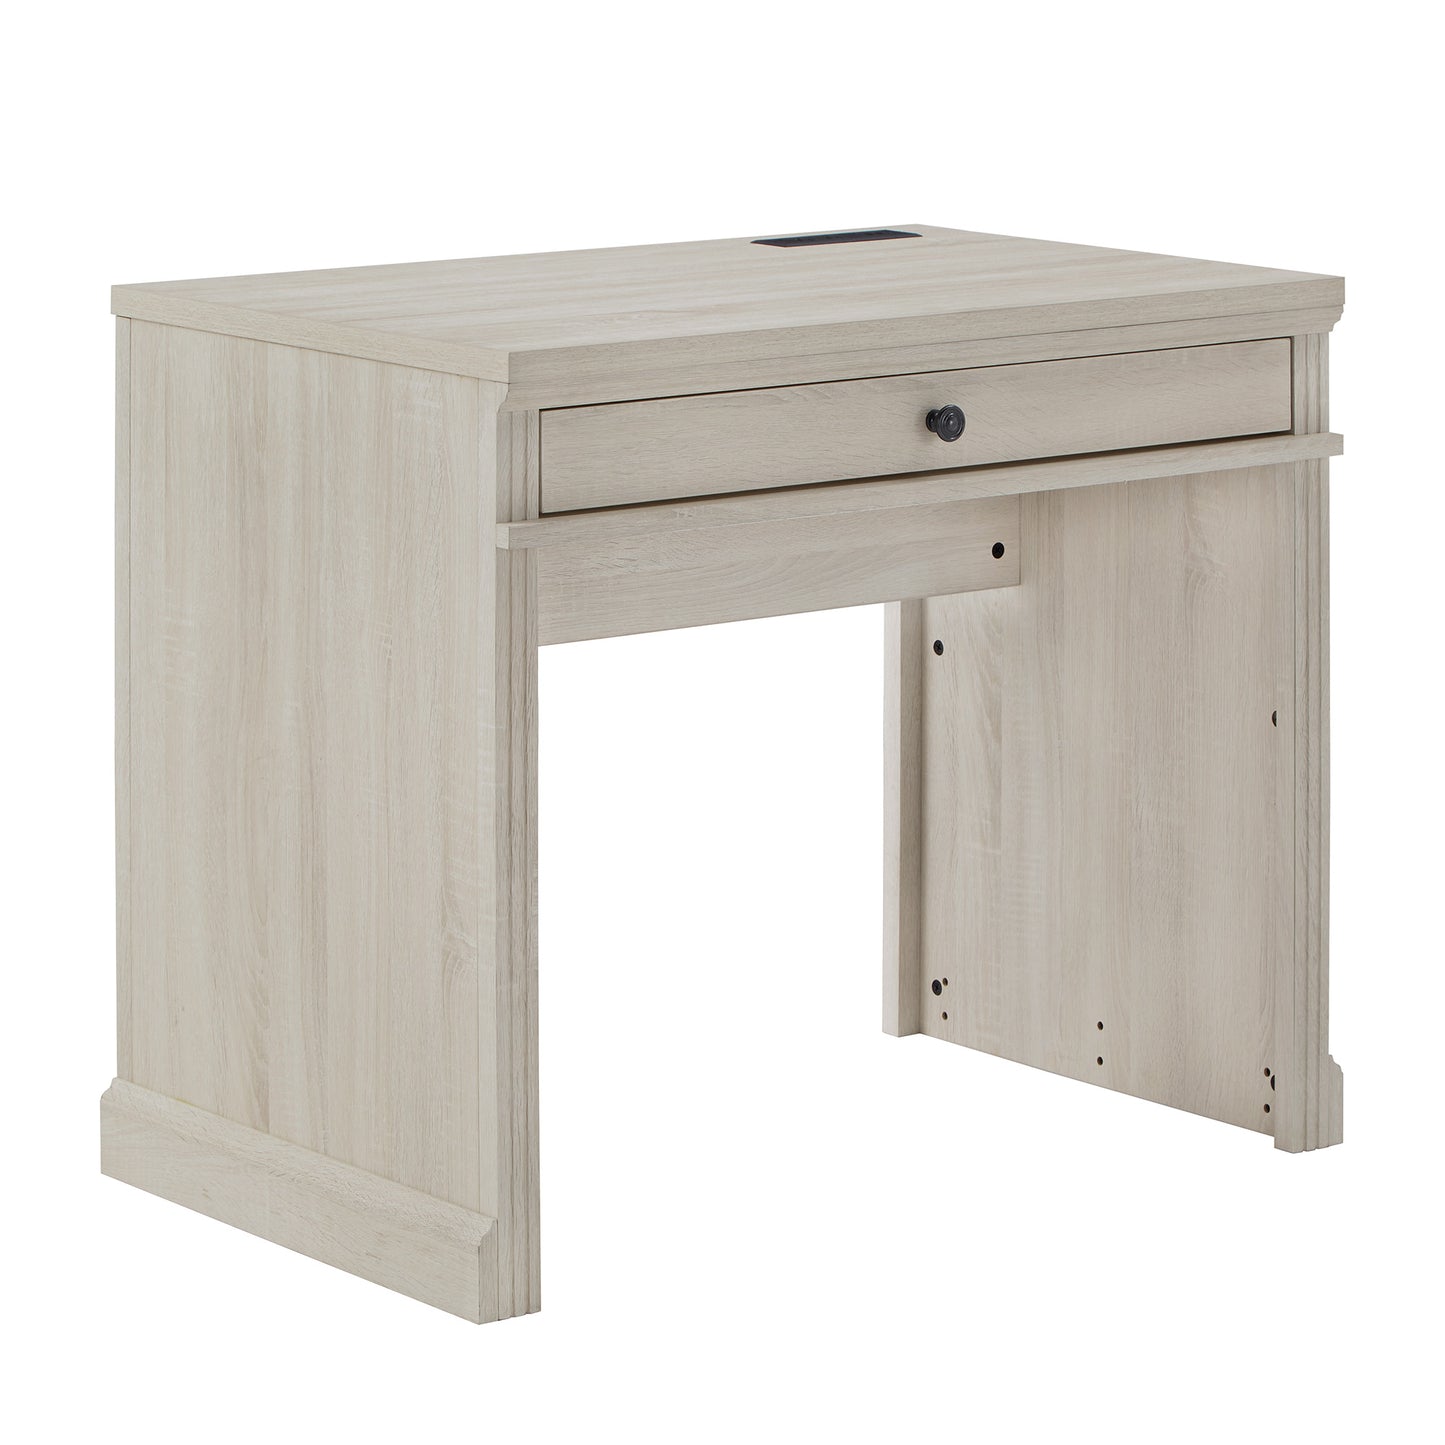 35 in. Writing Desk with USB Charger - Antique White Finish